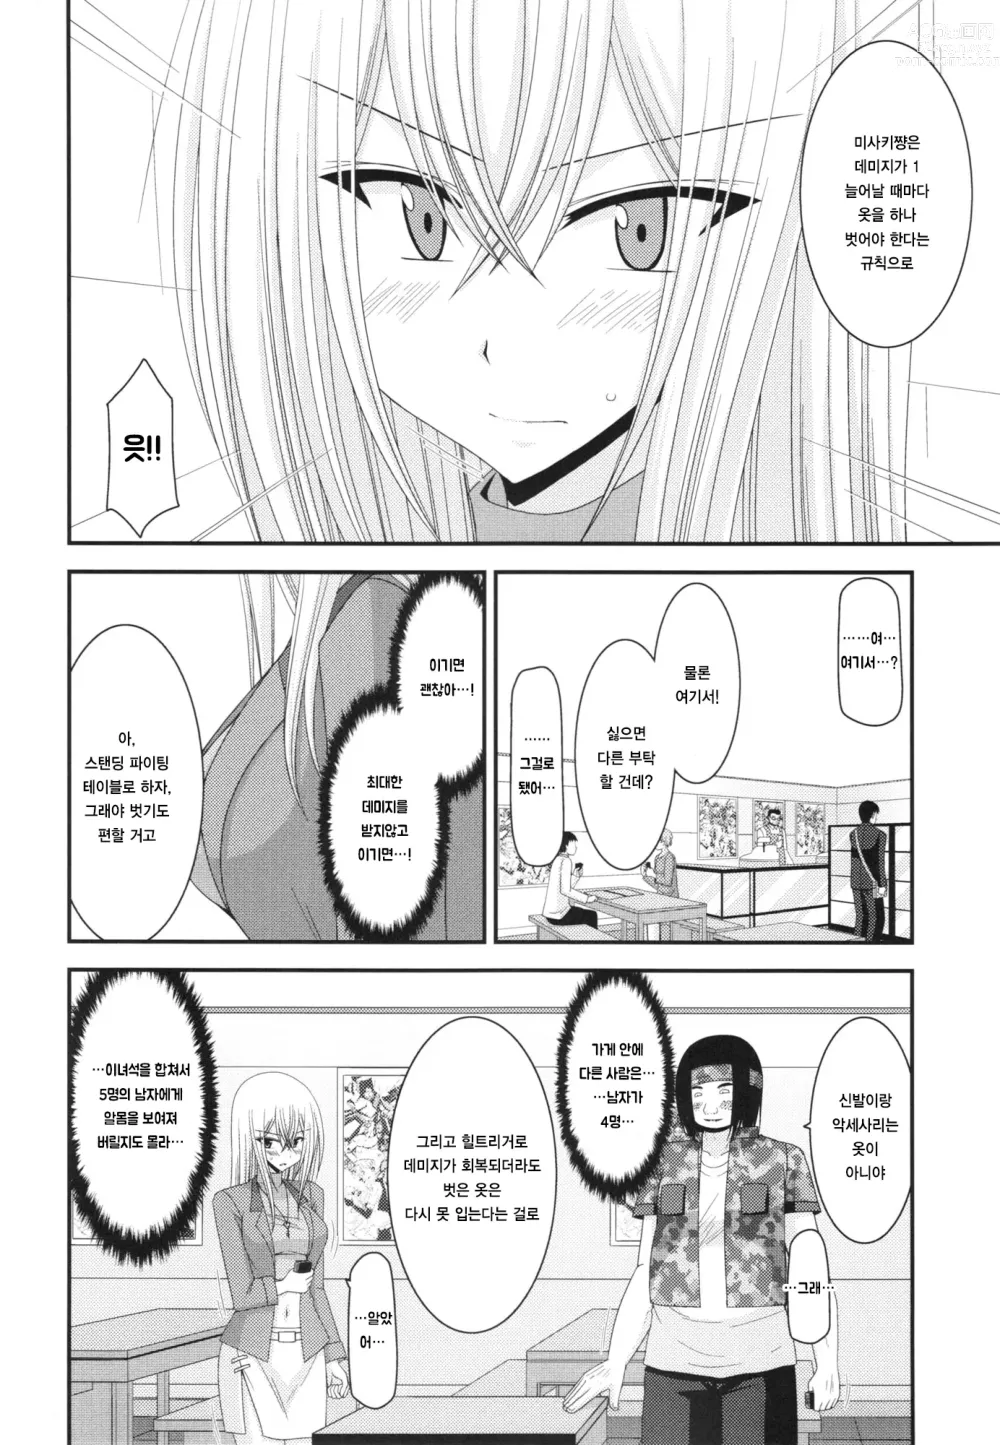 Page 10 of doujinshi Unbreakable Limit